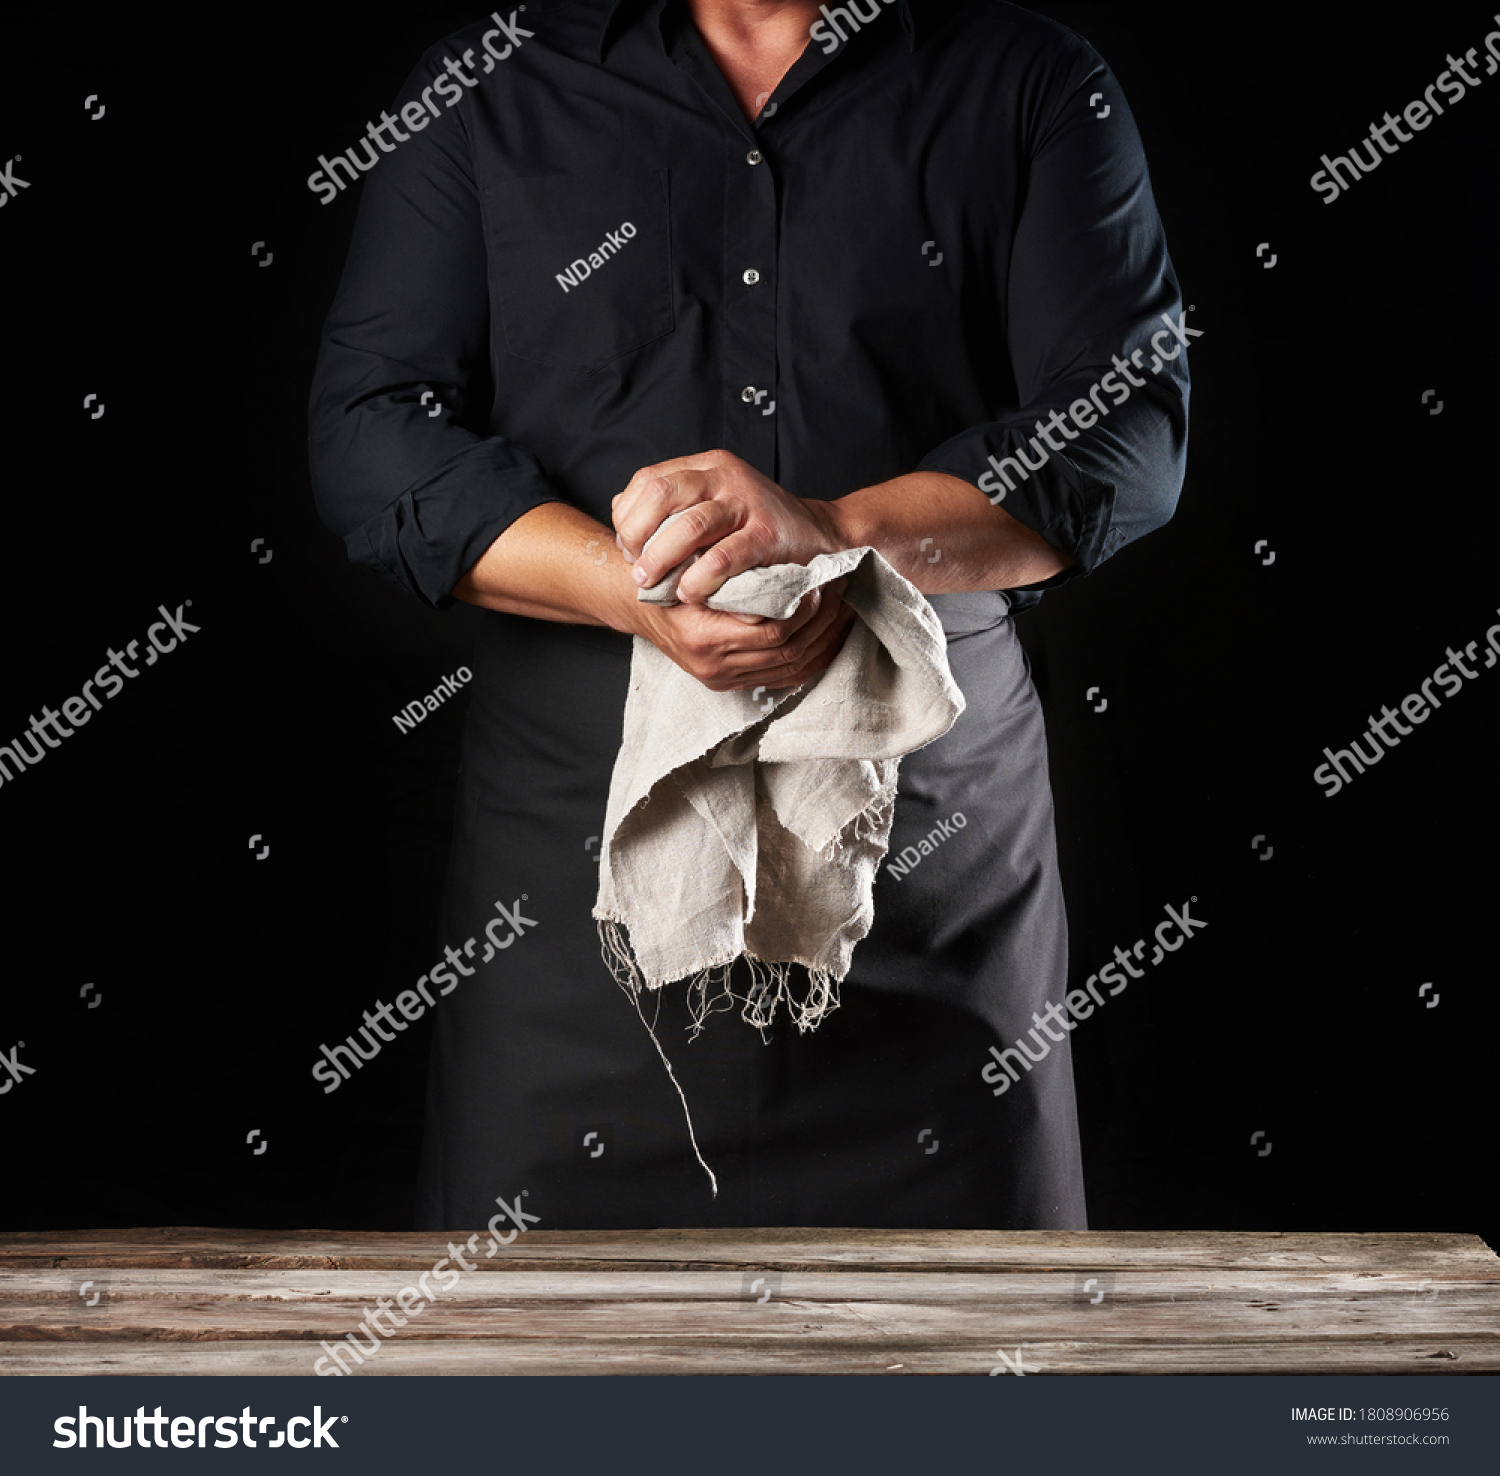 Man in black uniform holds gray linen rag and wipes his hands, chef stands on black background, close up #1808906956